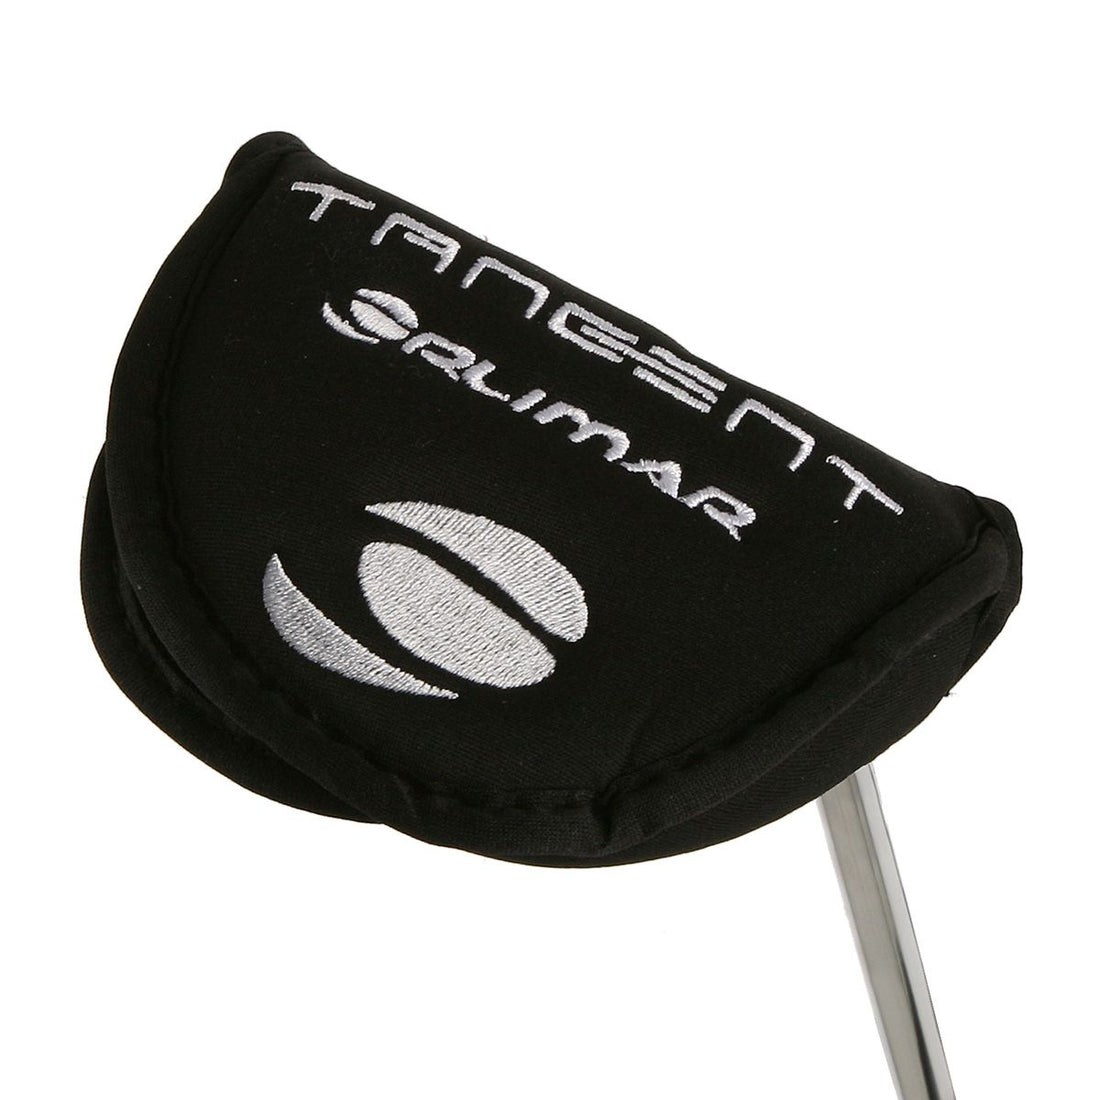 black putter head cover with Tangent, Orlimar and Orlimar logo embroidered in white covering a putter